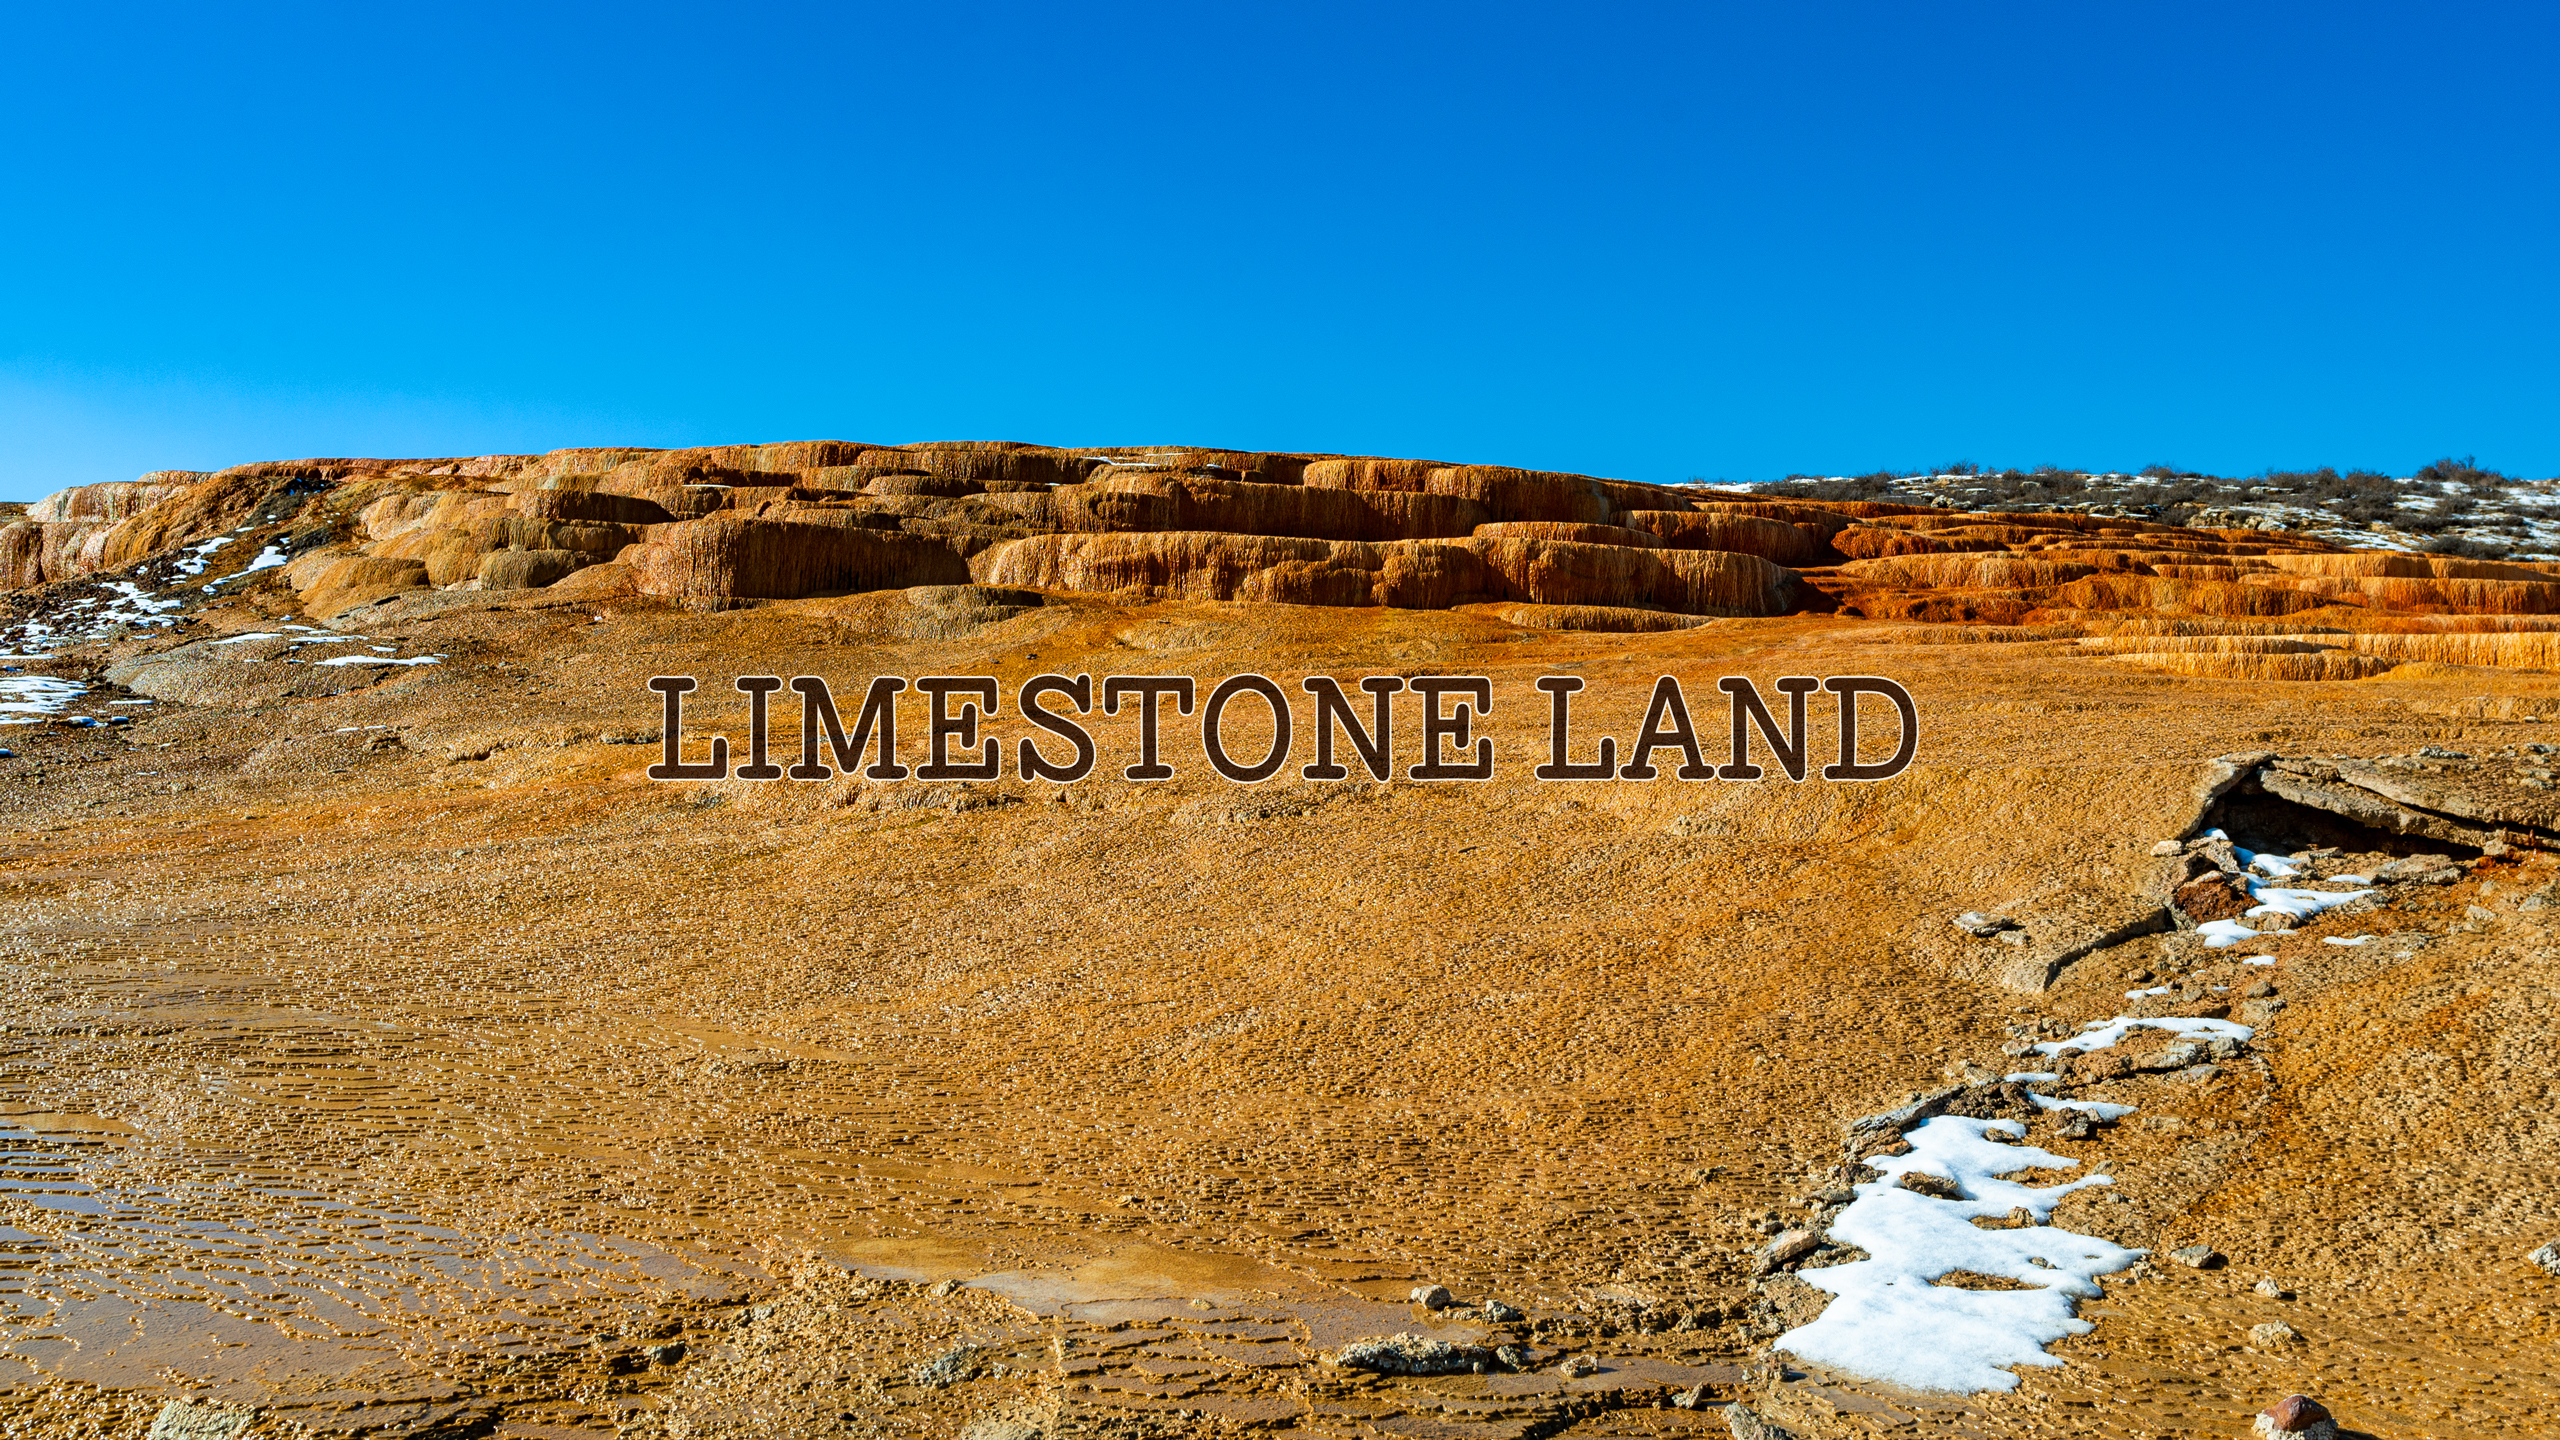 LIMESTONE LAND | 地球の縮図、A rocks made up mainly of calcium carbonate called limestone spread out like shelves.